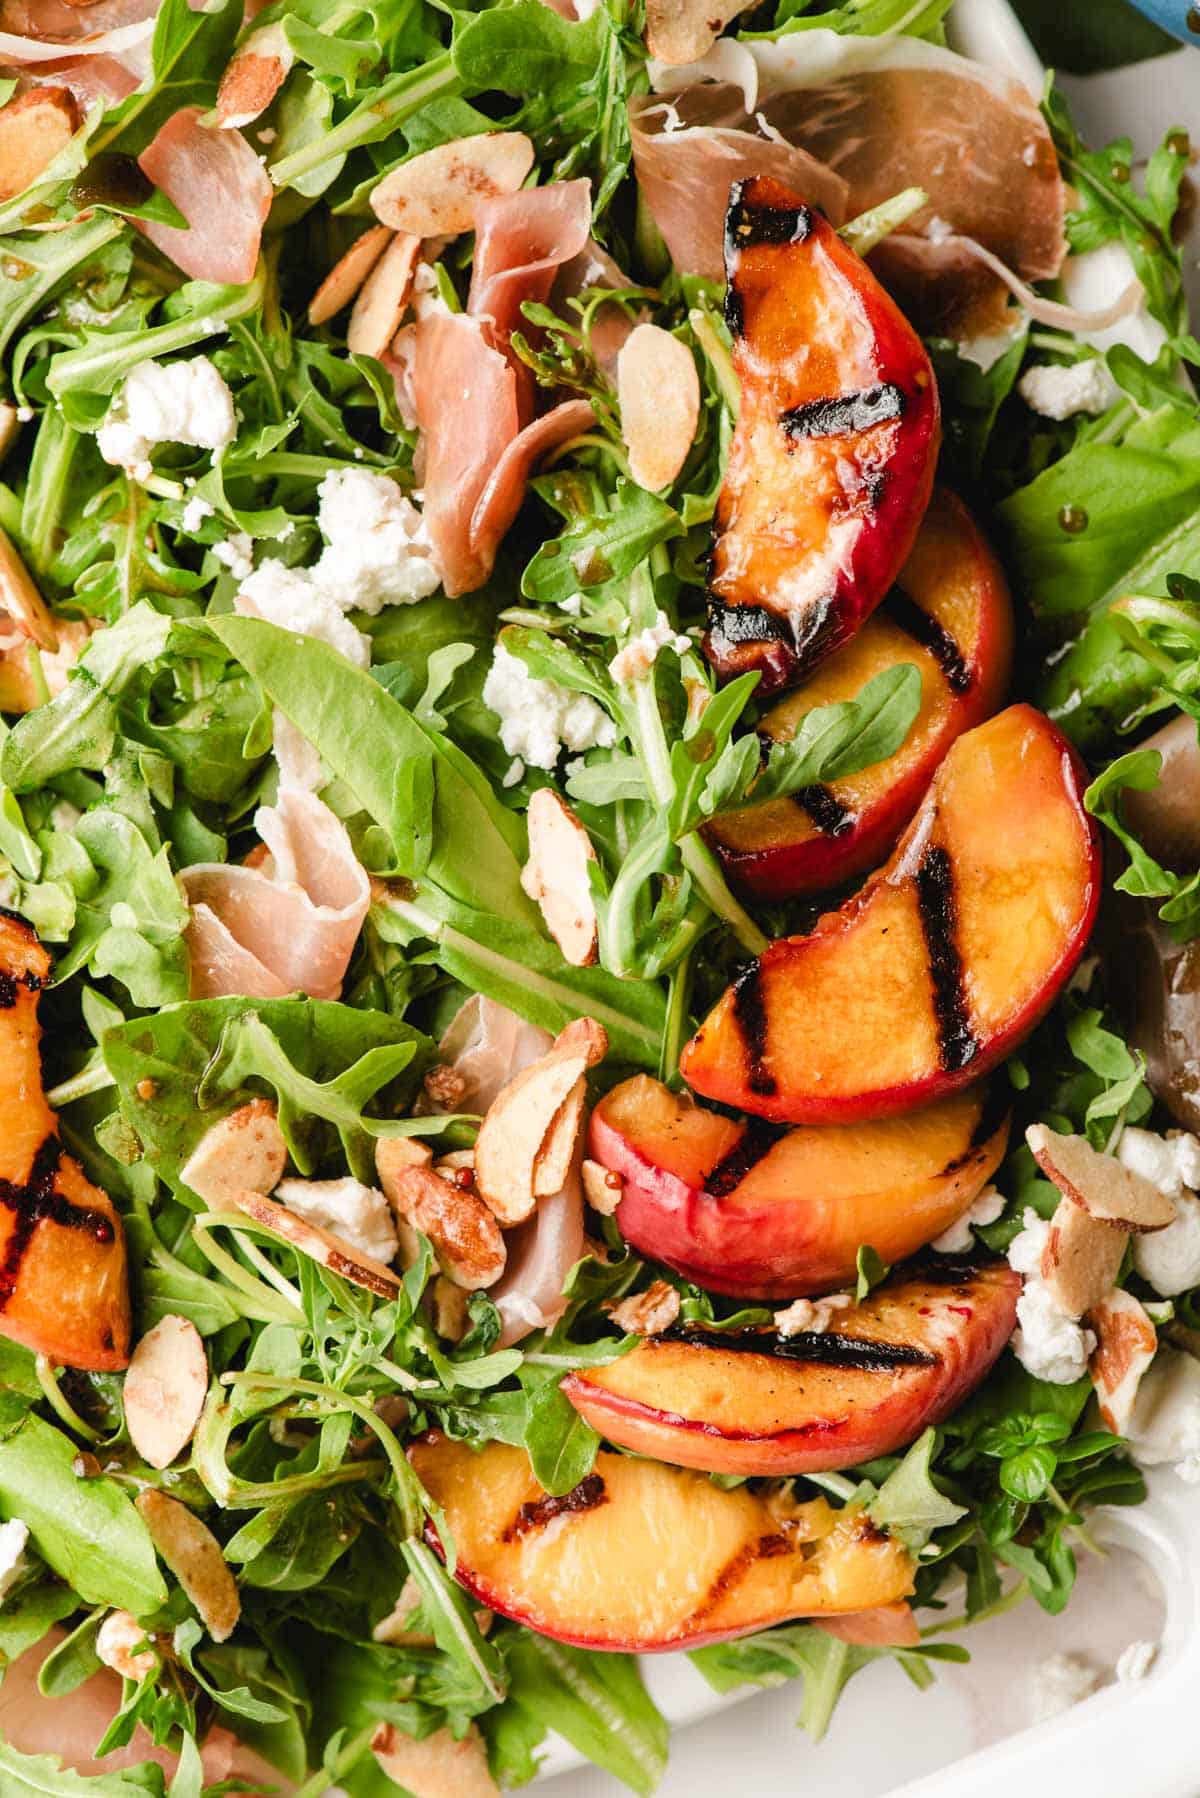 Grilled peaches on a bed of salad greens with goat cheese and prosciutto.